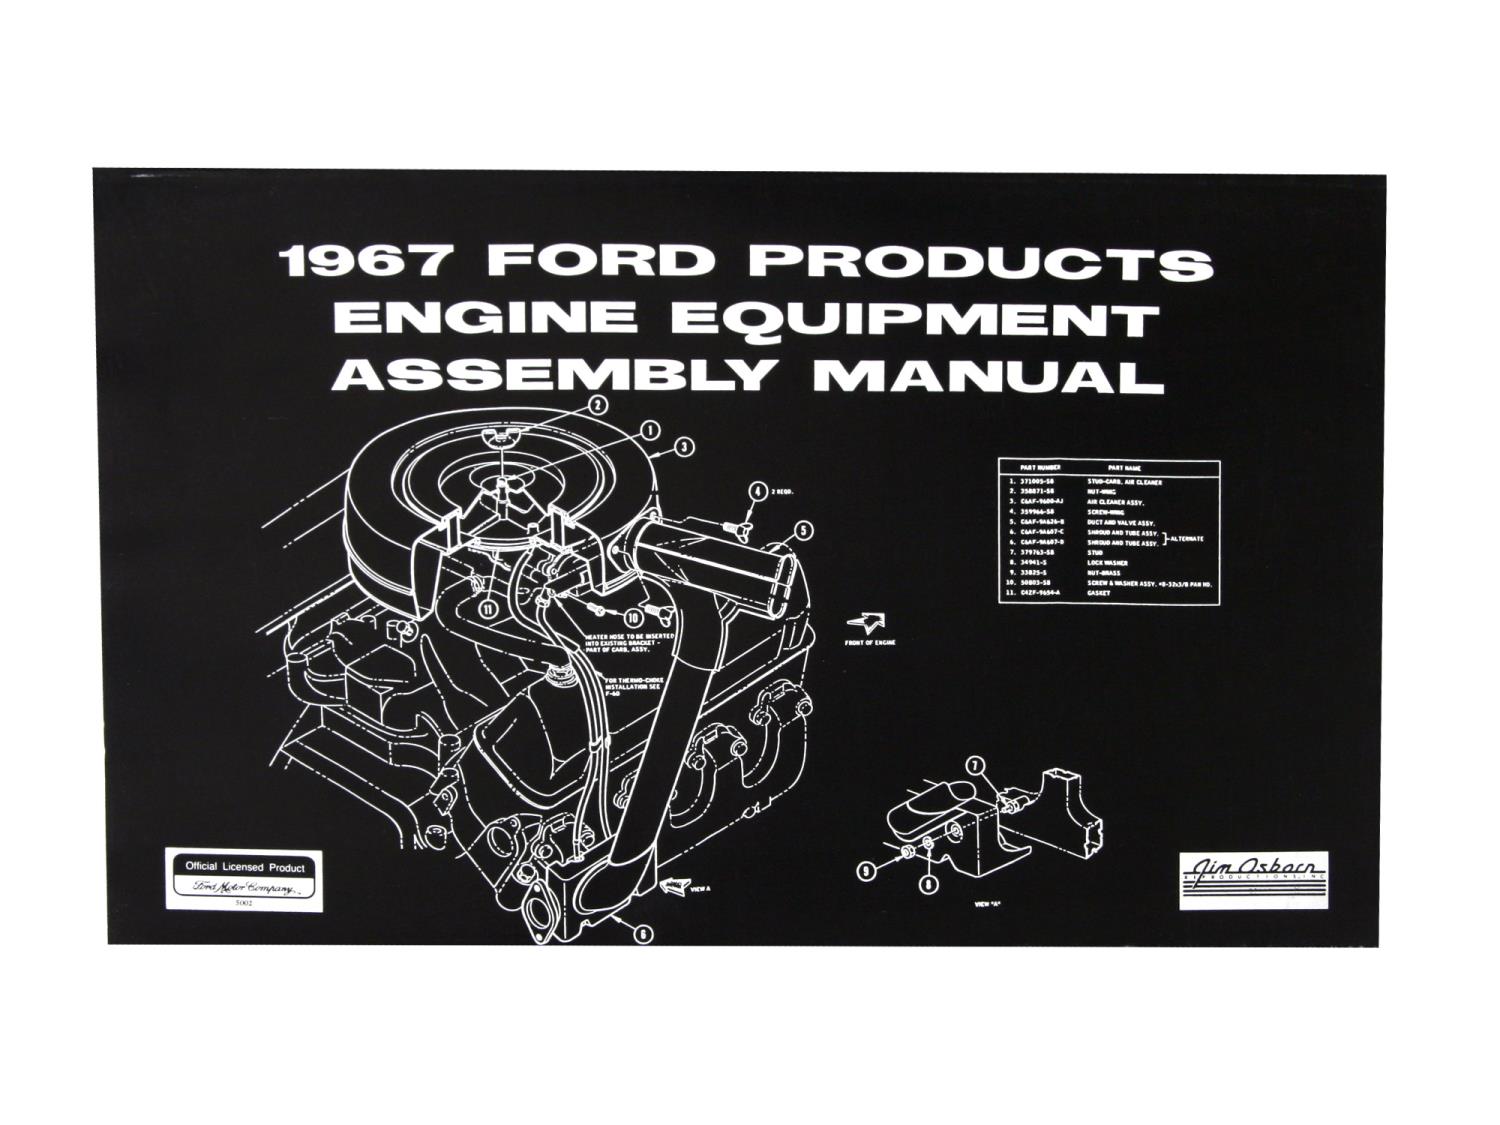 Engine Equipment Assembly Manual for 1967 Ford Mustang